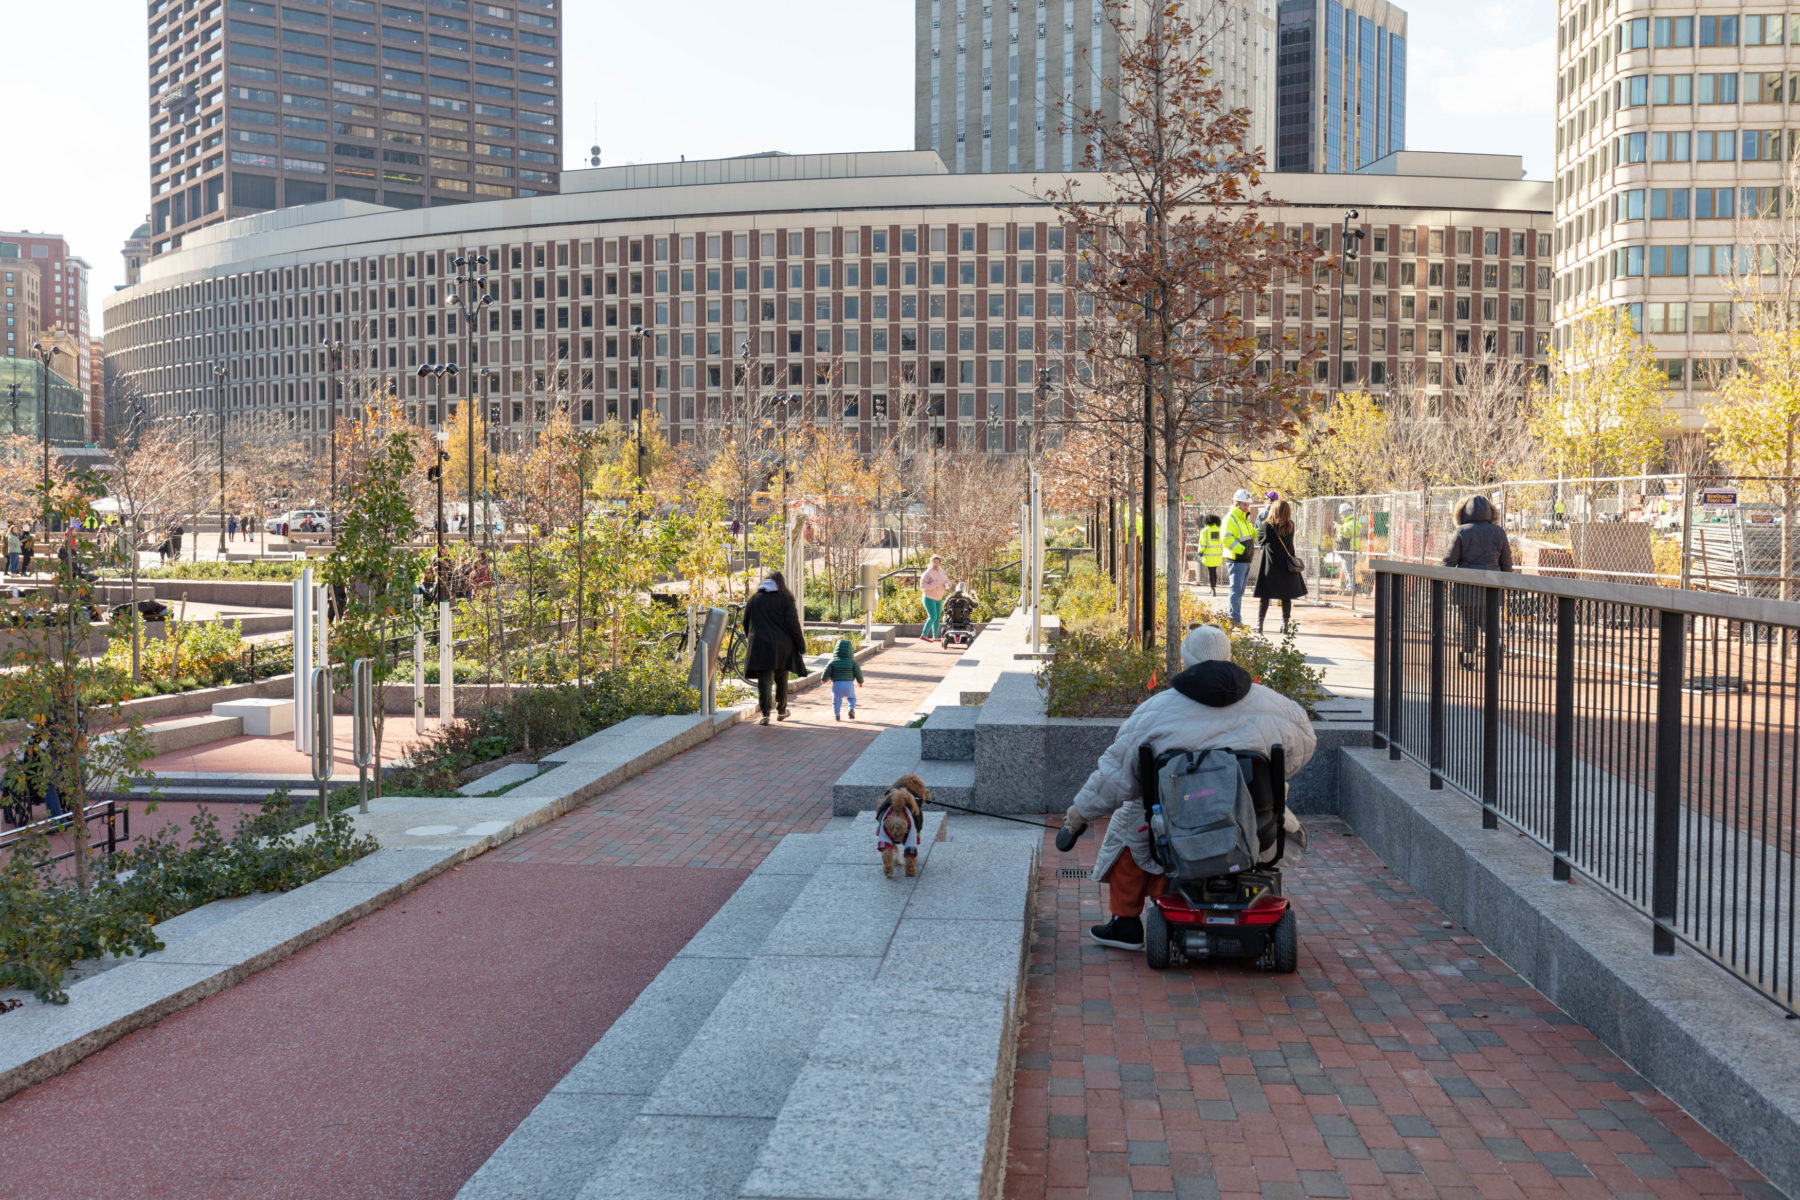 A woman using an electric wheel chair explores the plaza with her dog